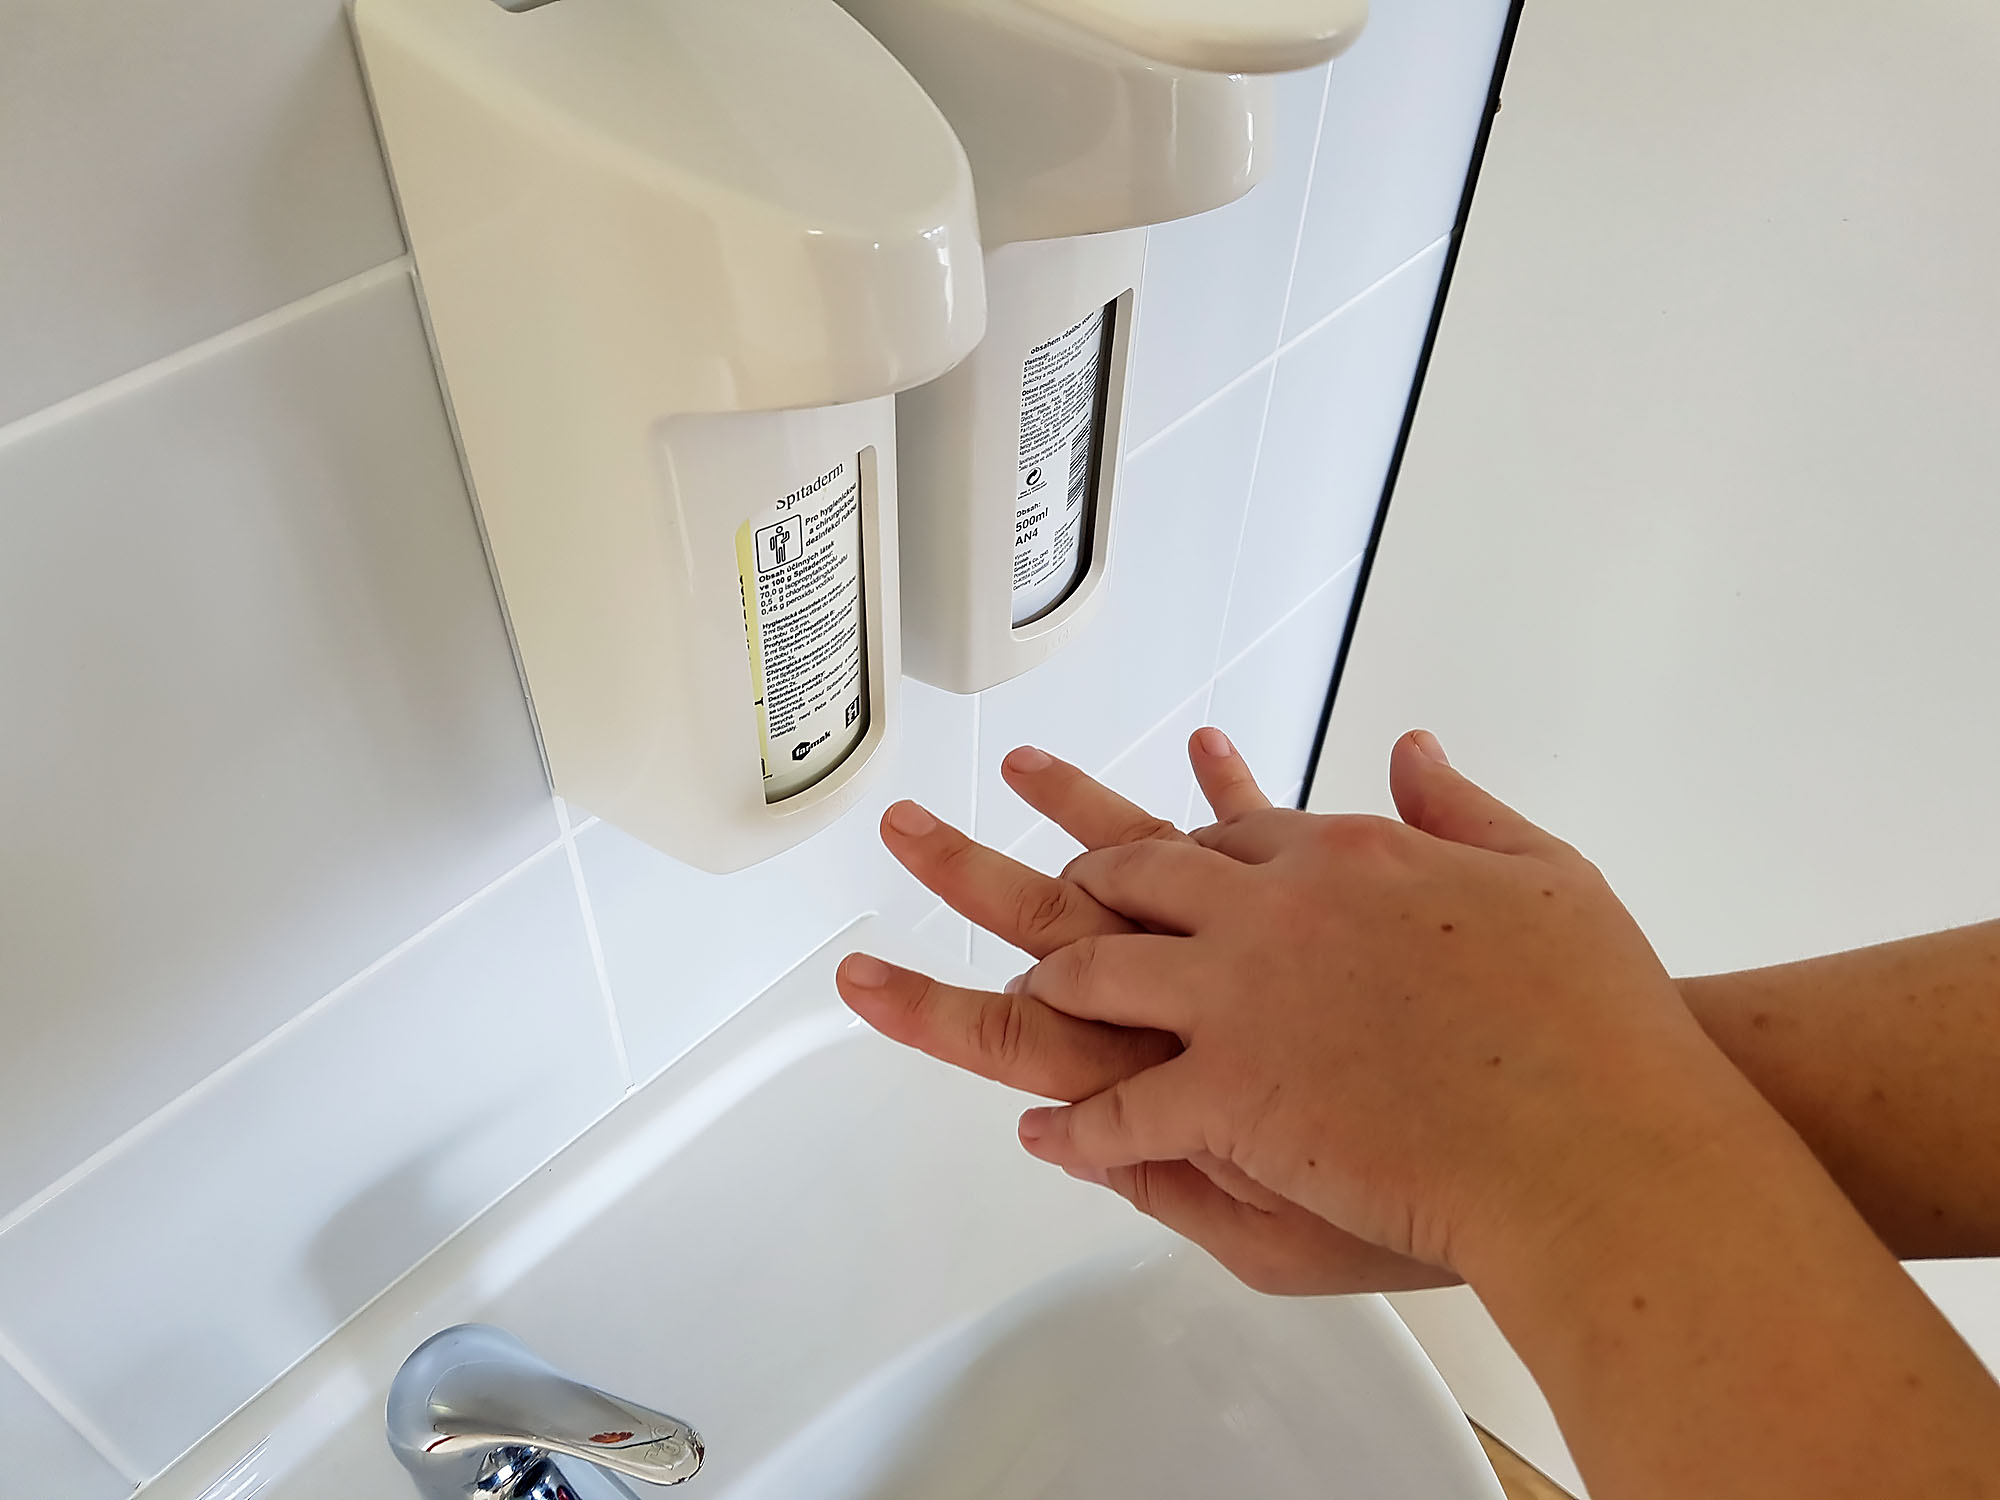 Procedure for rubbing the disinfectant solution during hygienic hand disinfection (Step 2)